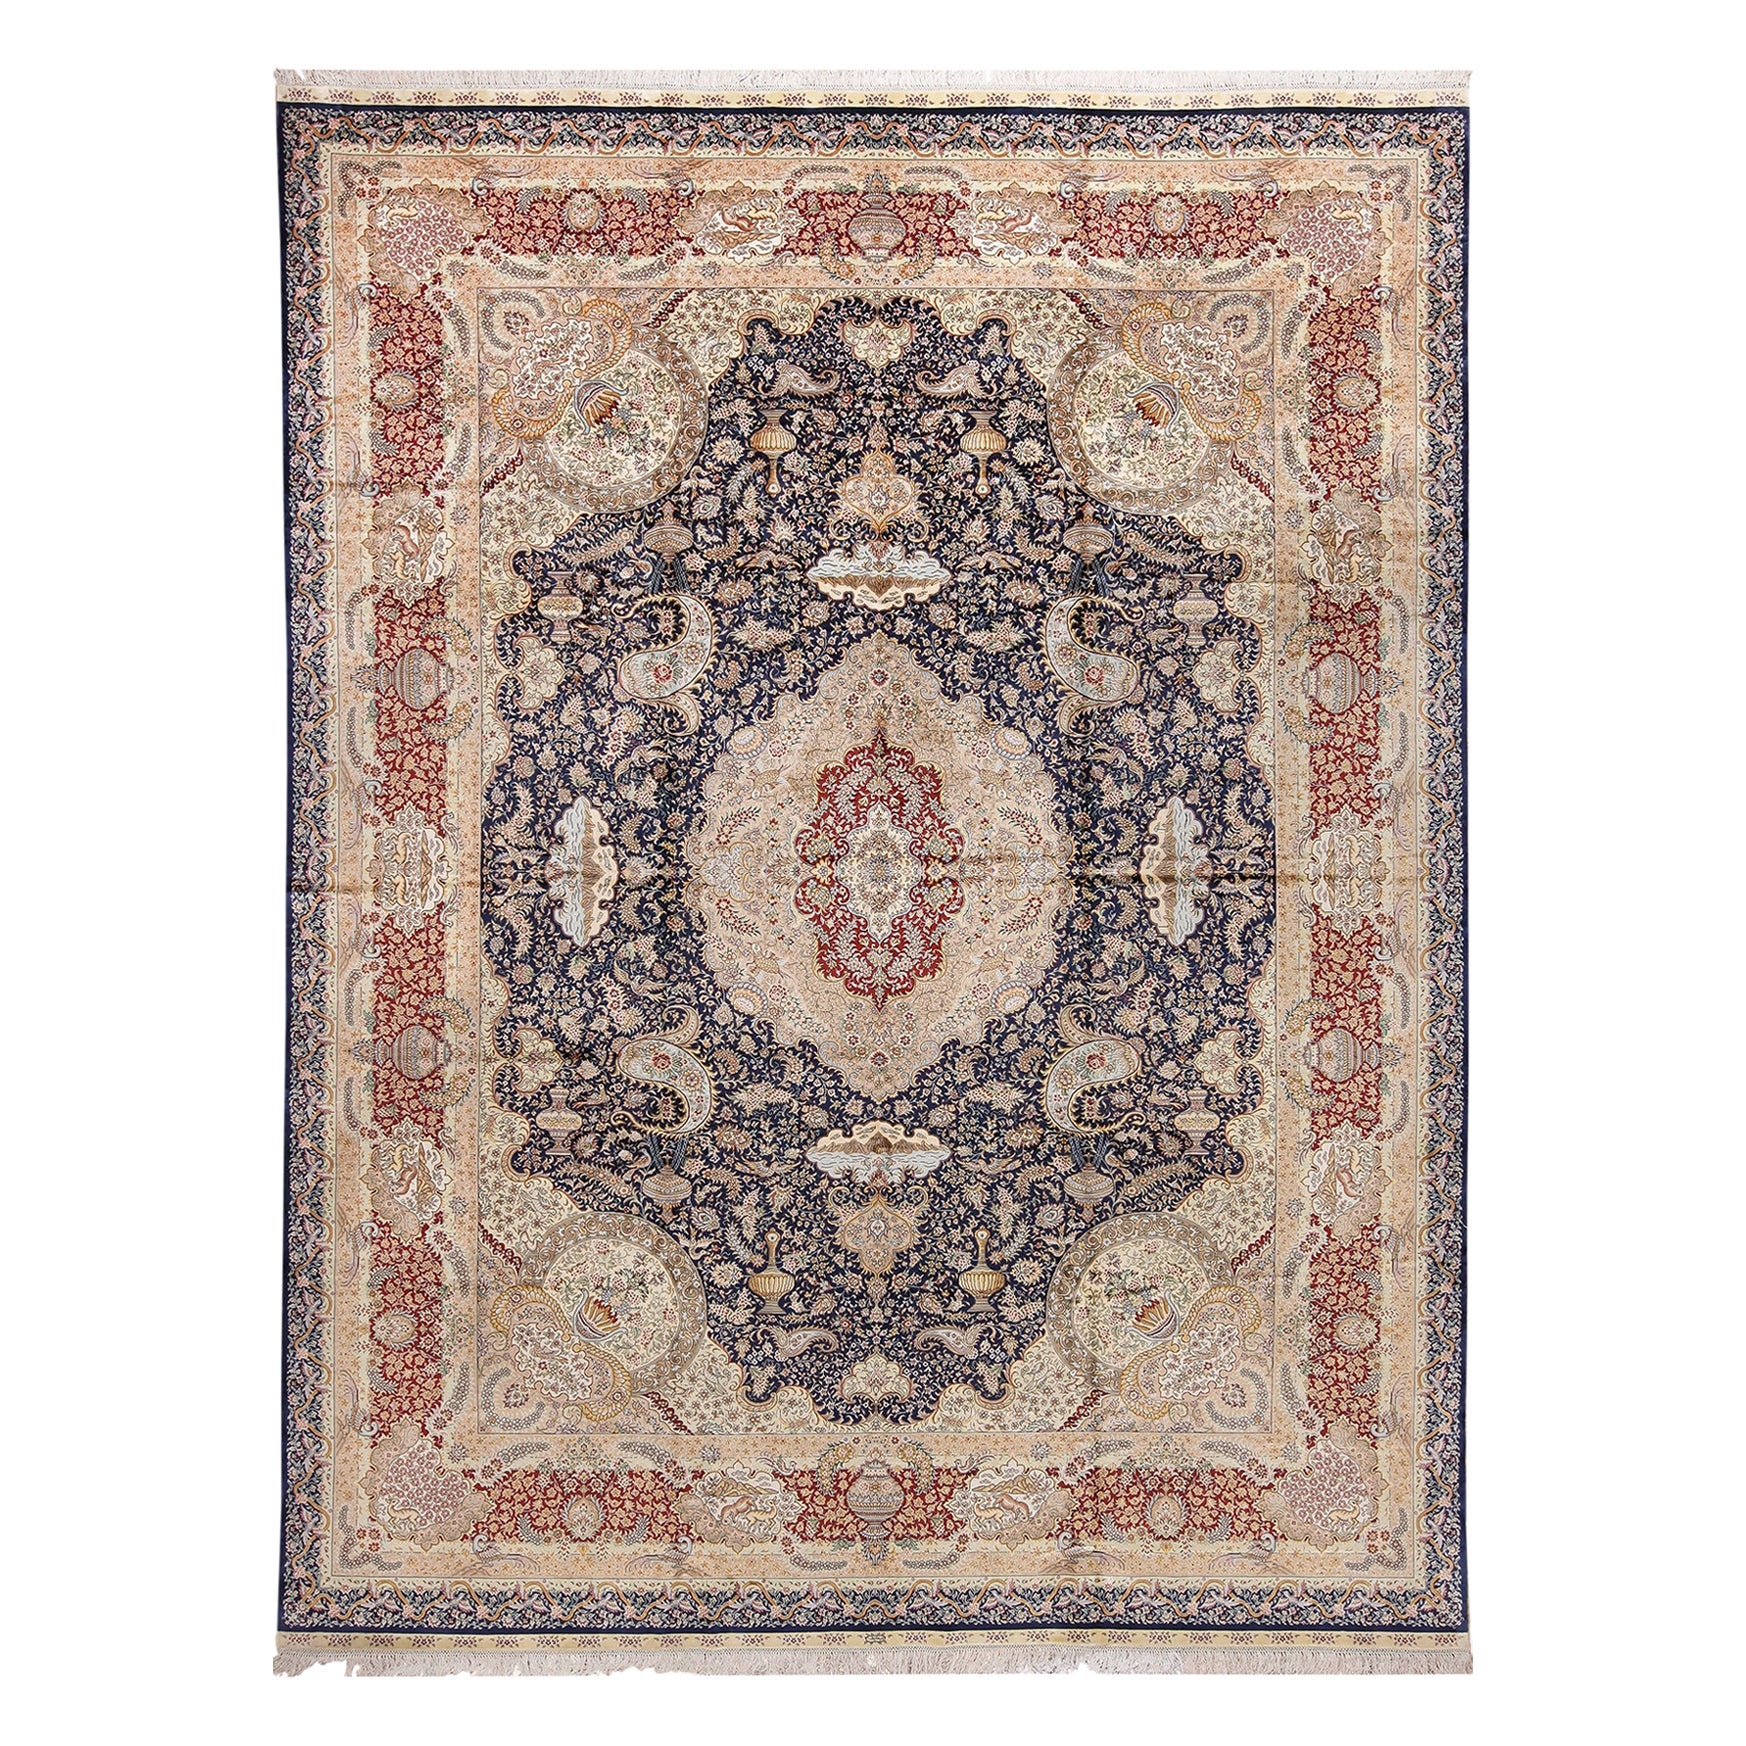 Silk Modern Chinese Rug. 9 ft x 11 ft 9 in (2.74 m x 3.58 m)